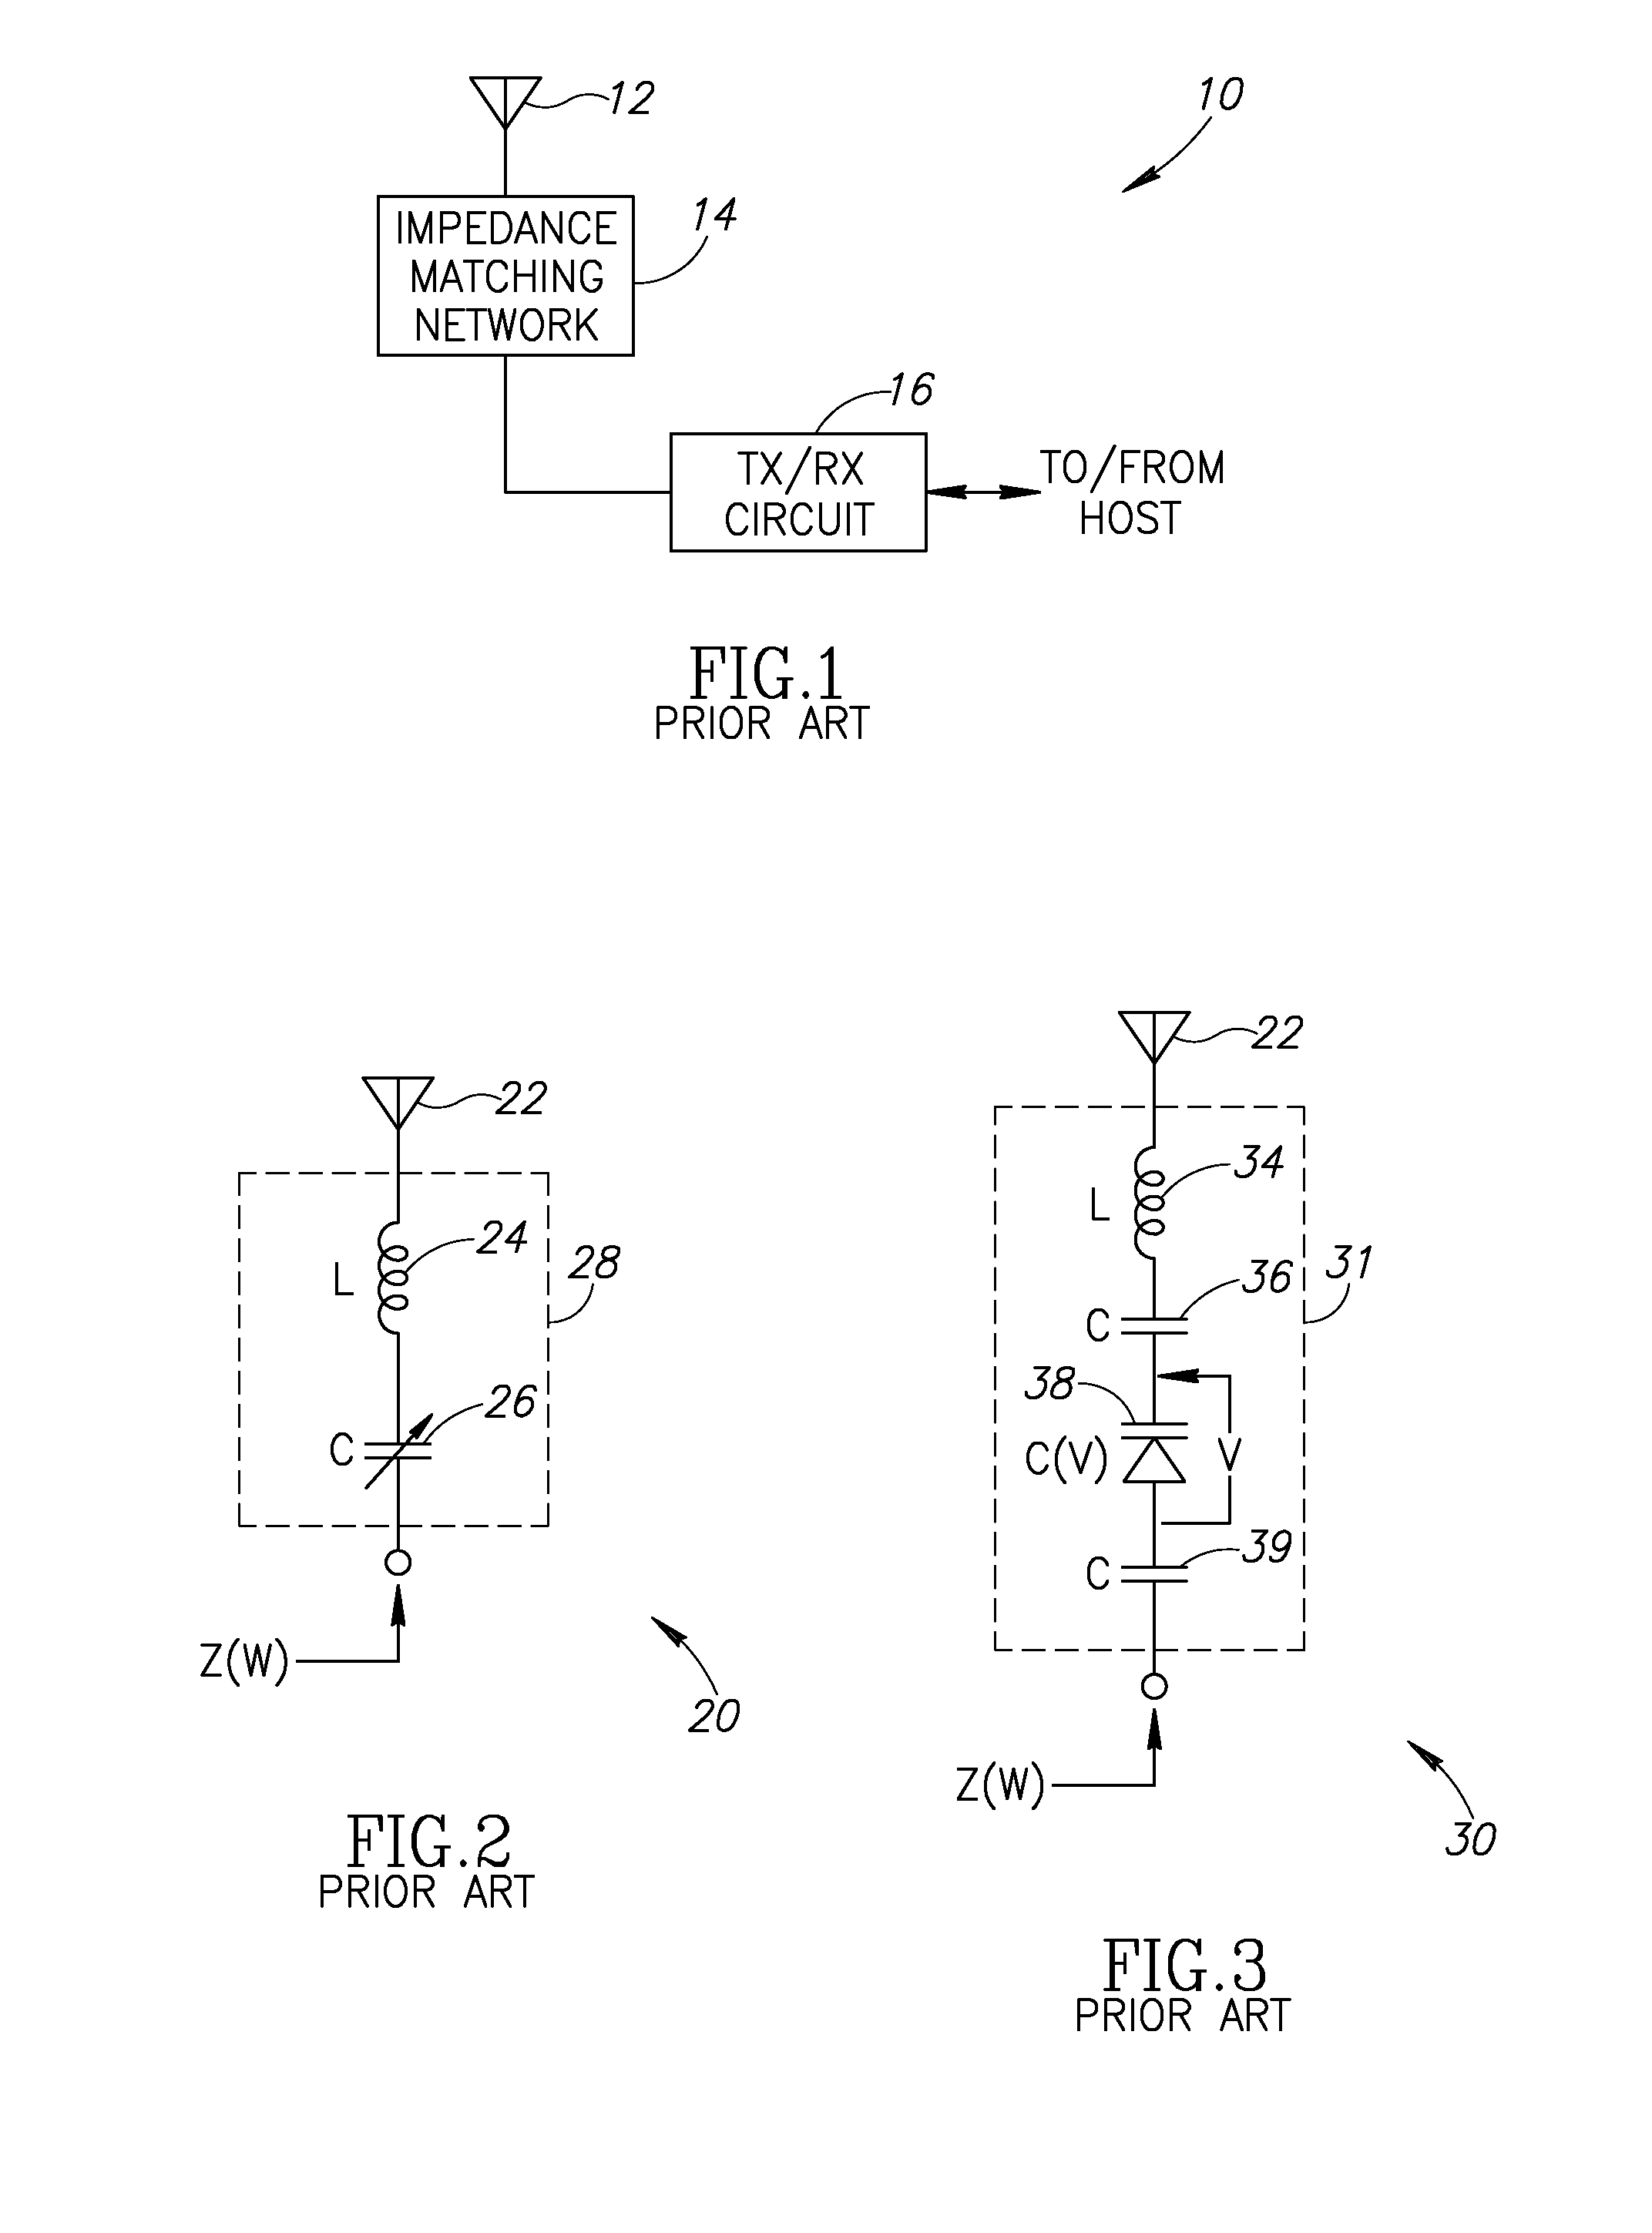 Digitally controlled antenna tuning circuit for radio frequency receivers